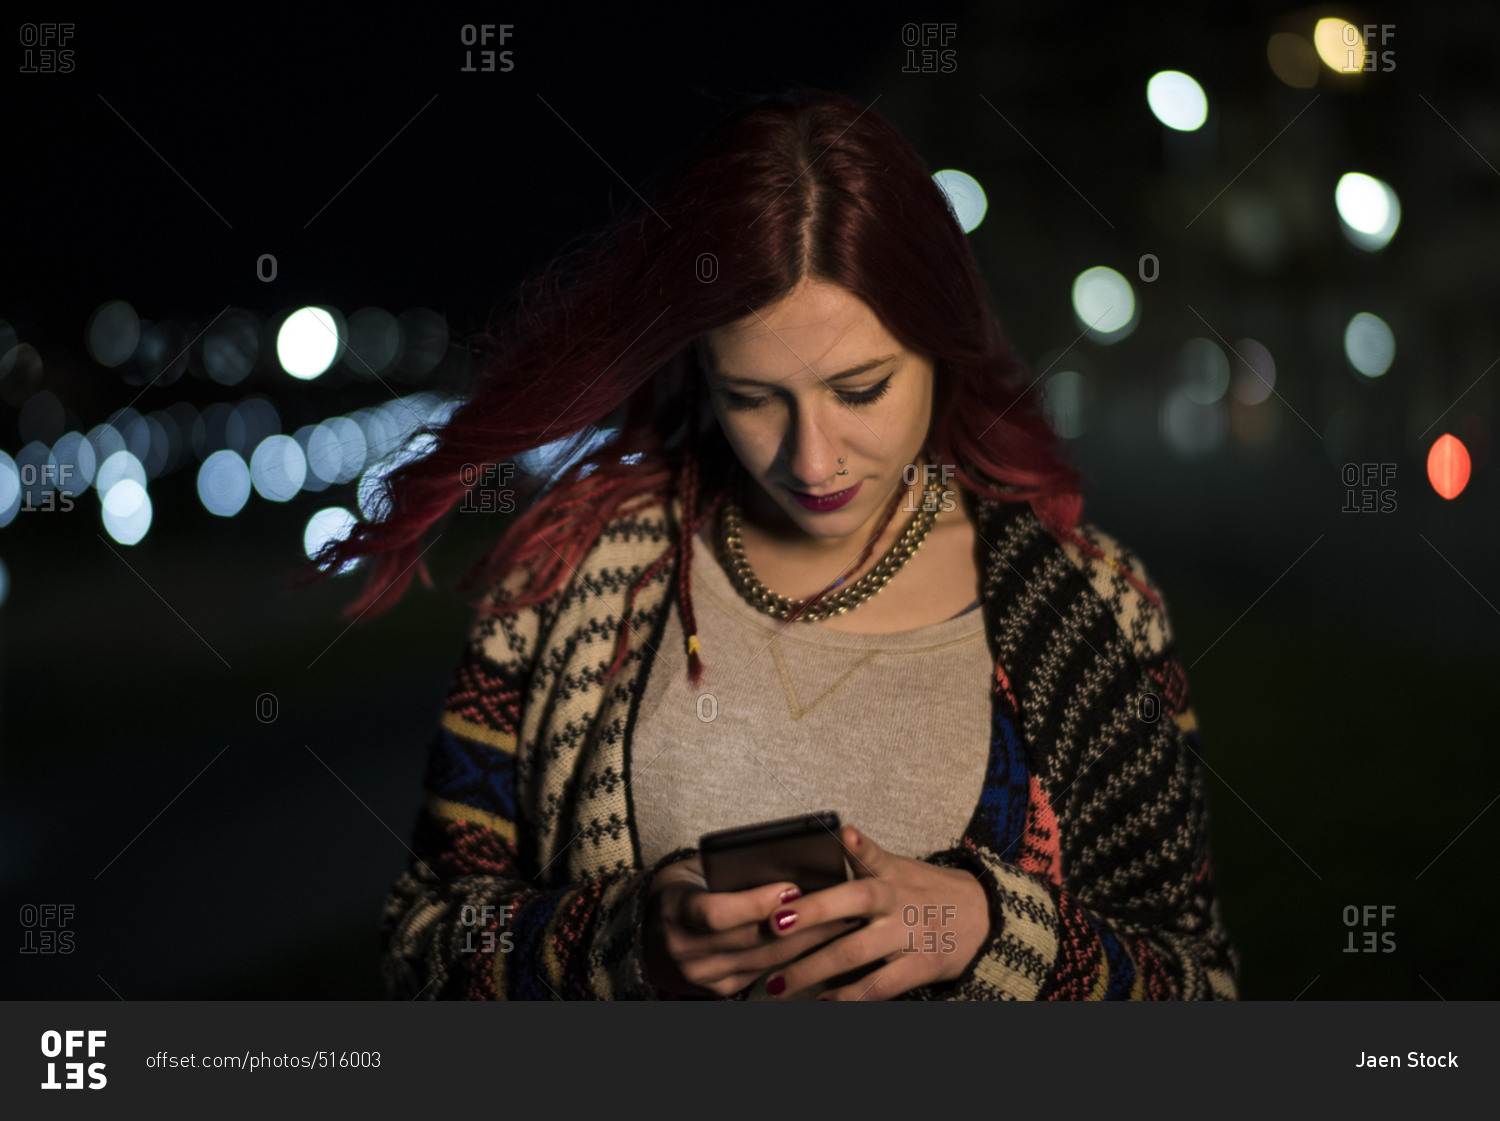 Red haired woman on her phone with night lights in the background